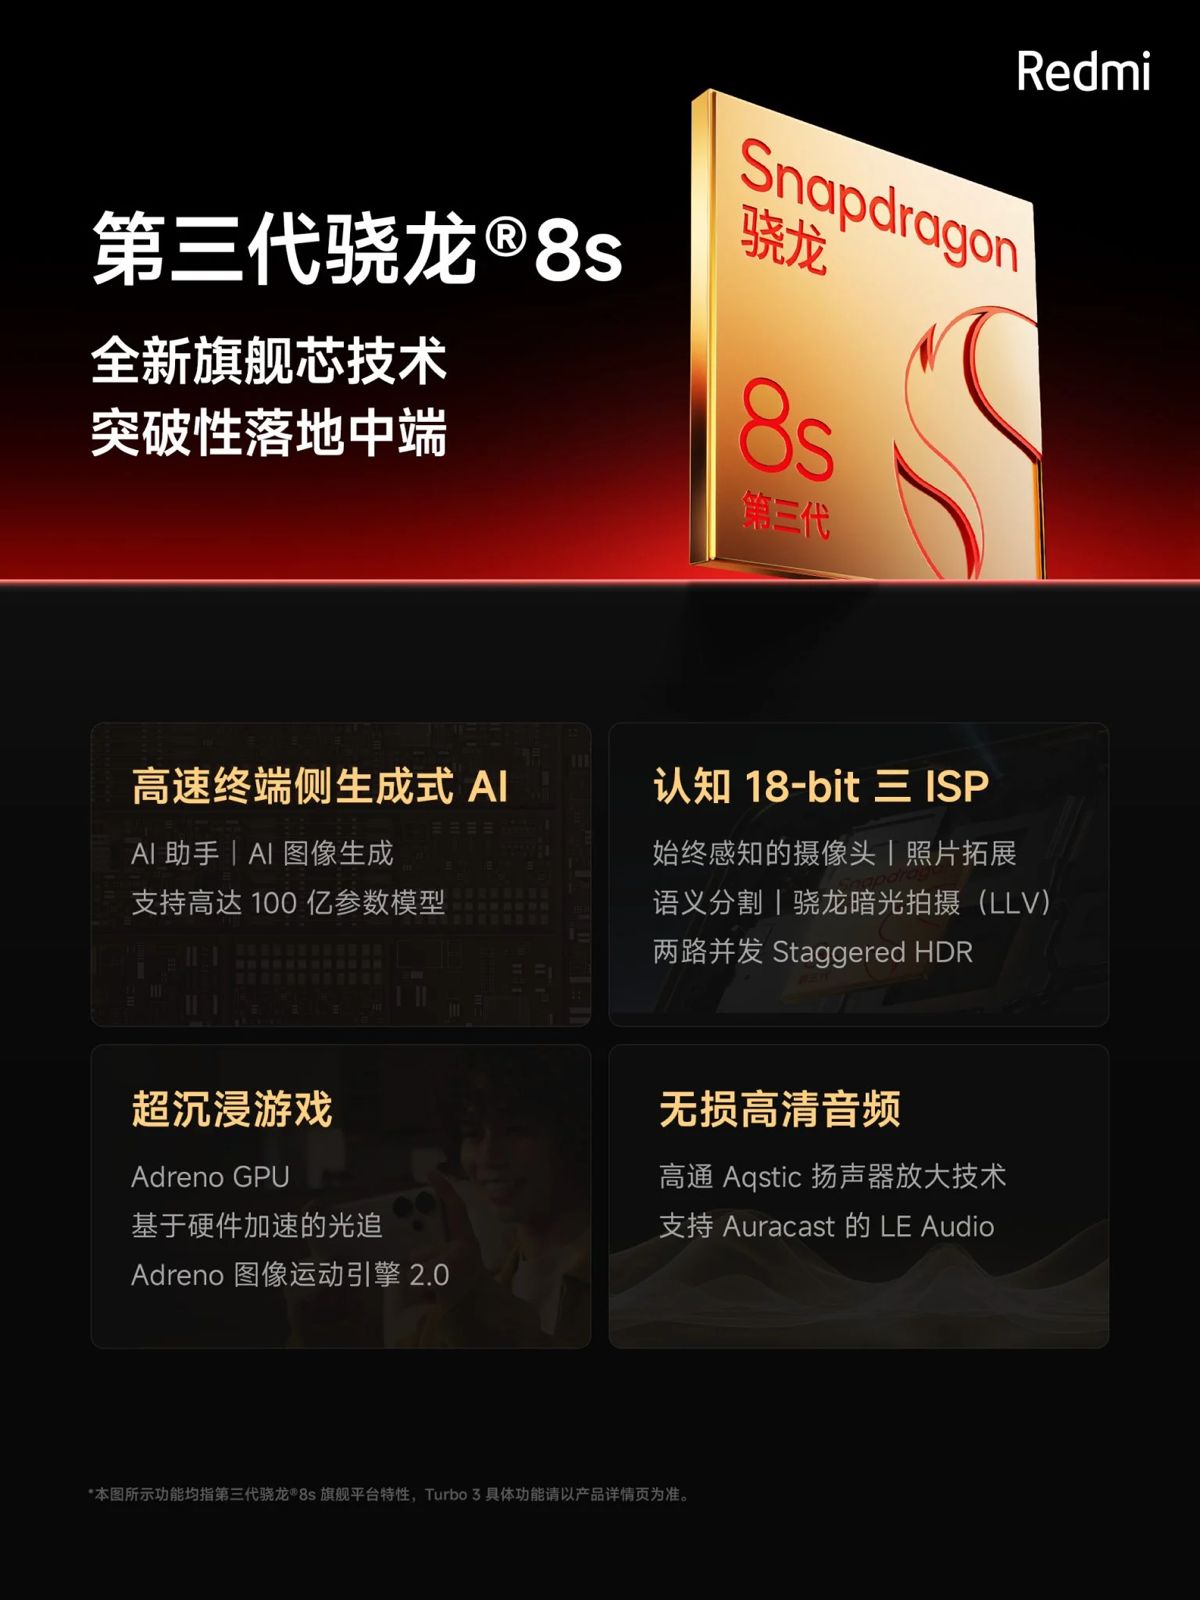 Redmi Turbo 3 is confirmed to be powered by Snapdragon 8s Gen 3 chipset with 16GB RAM and 1TB storage